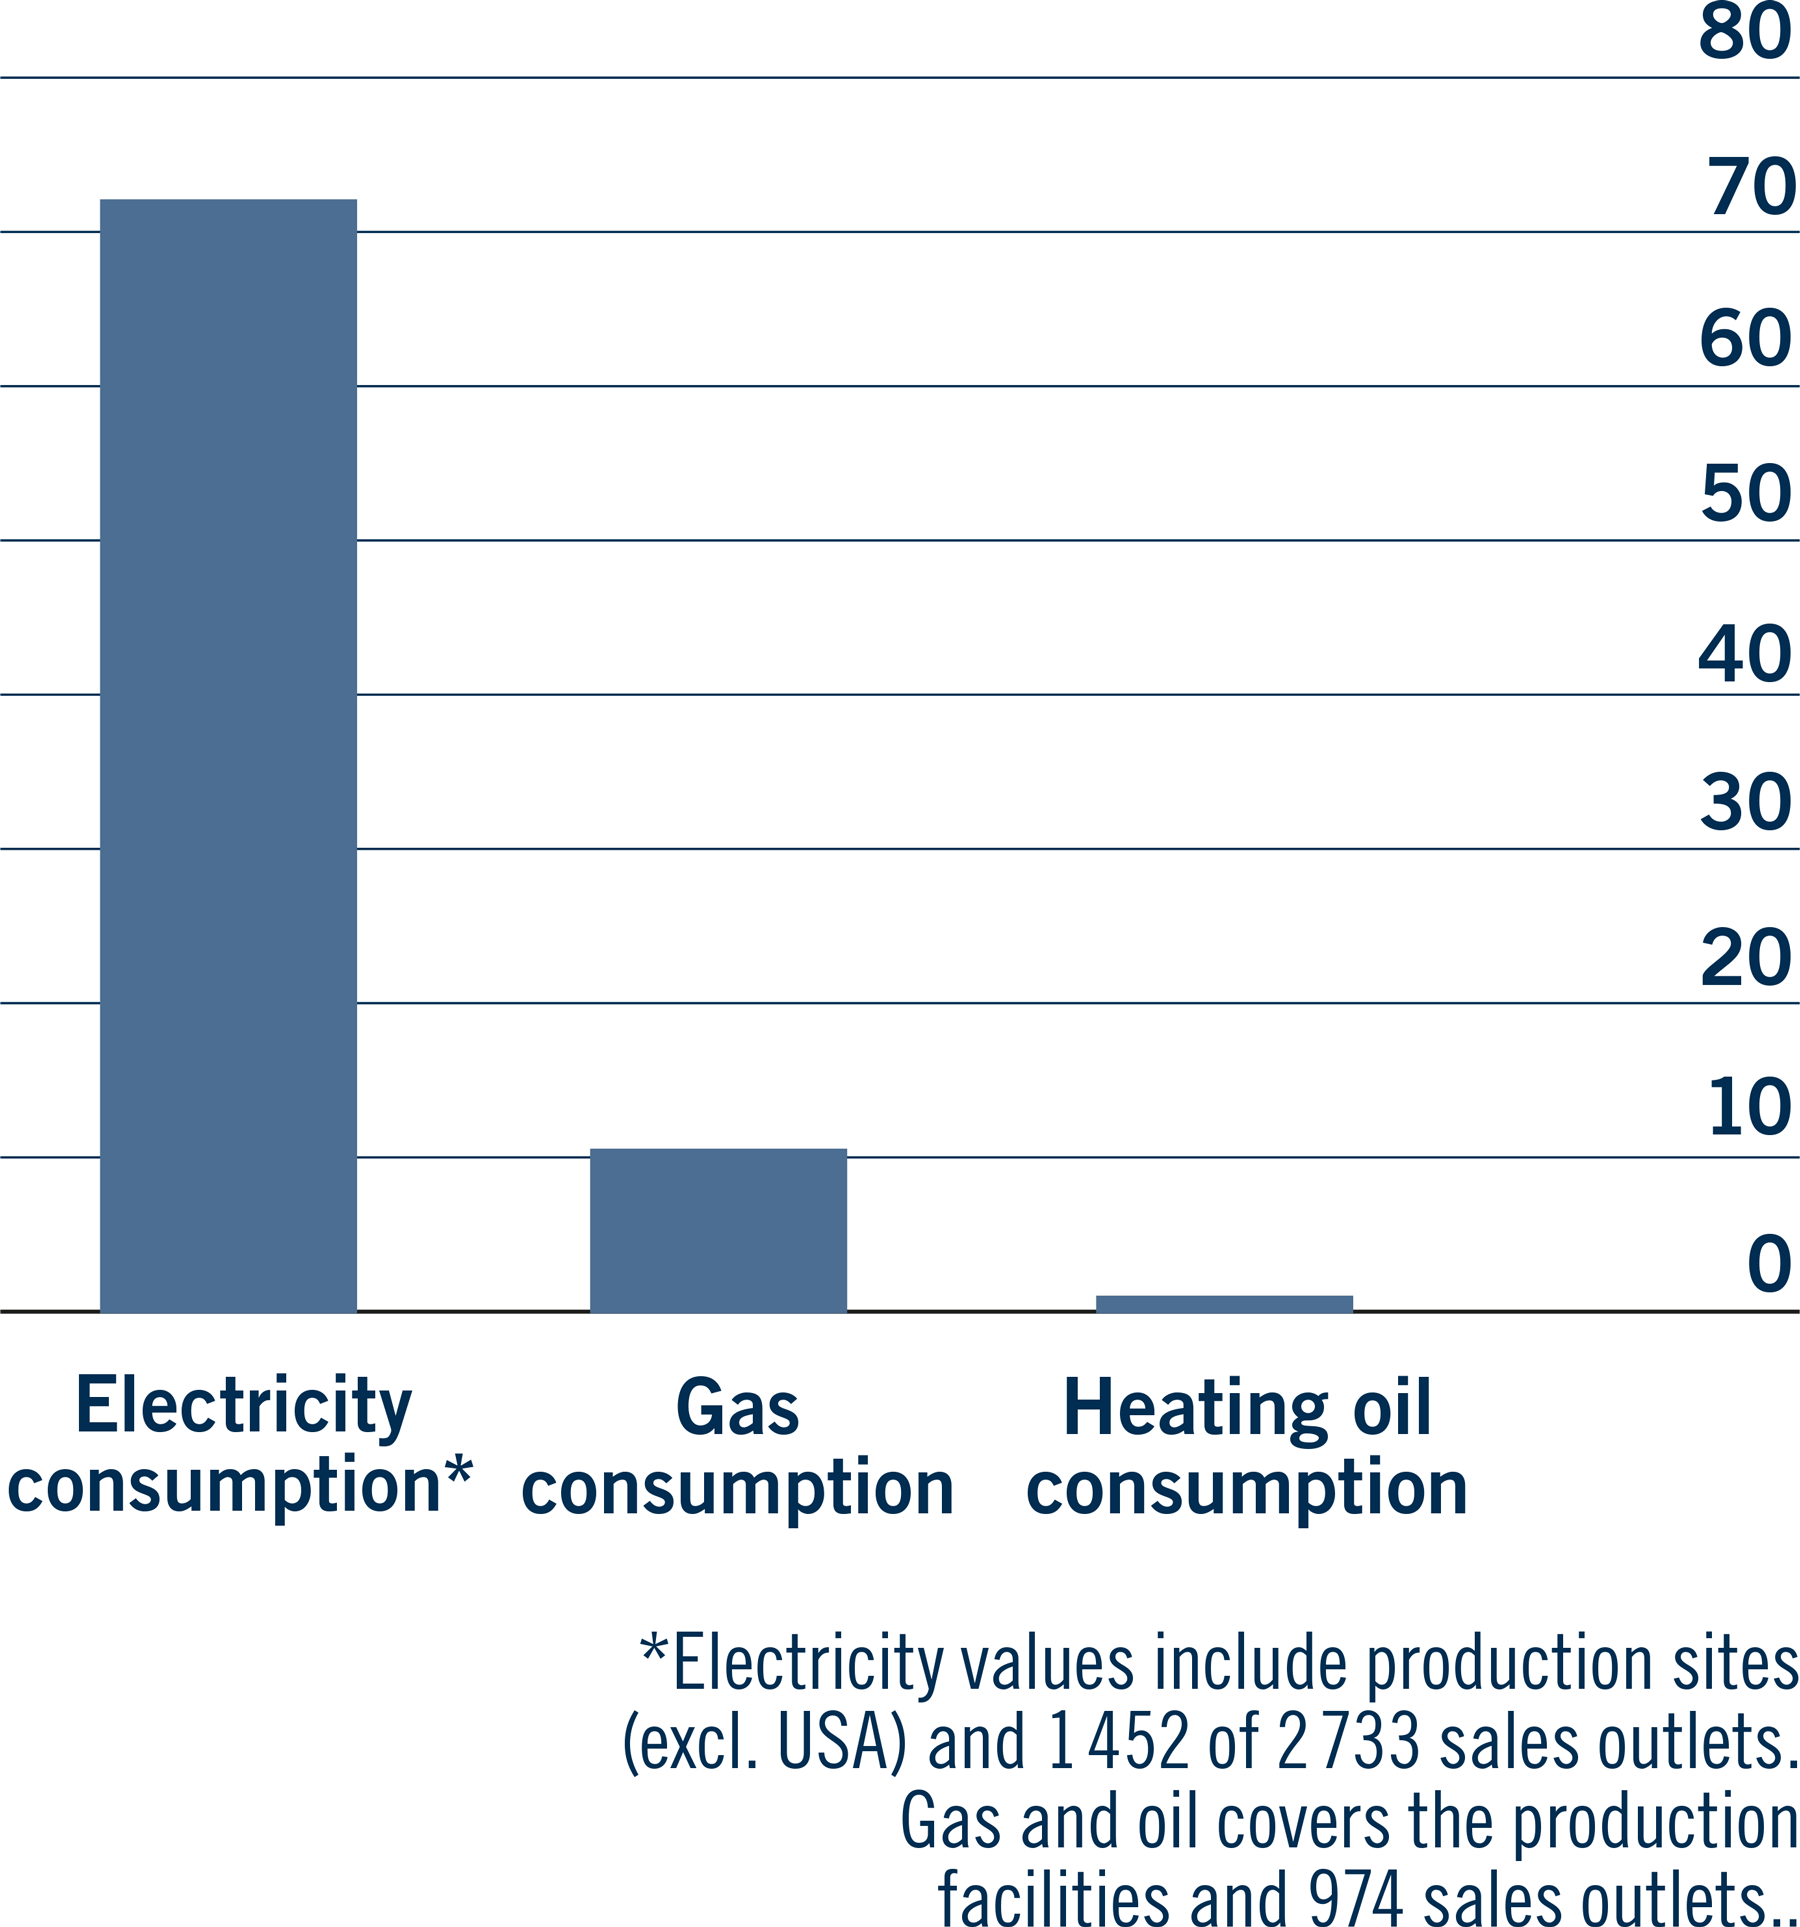 Energy consumption in MWh ‘000